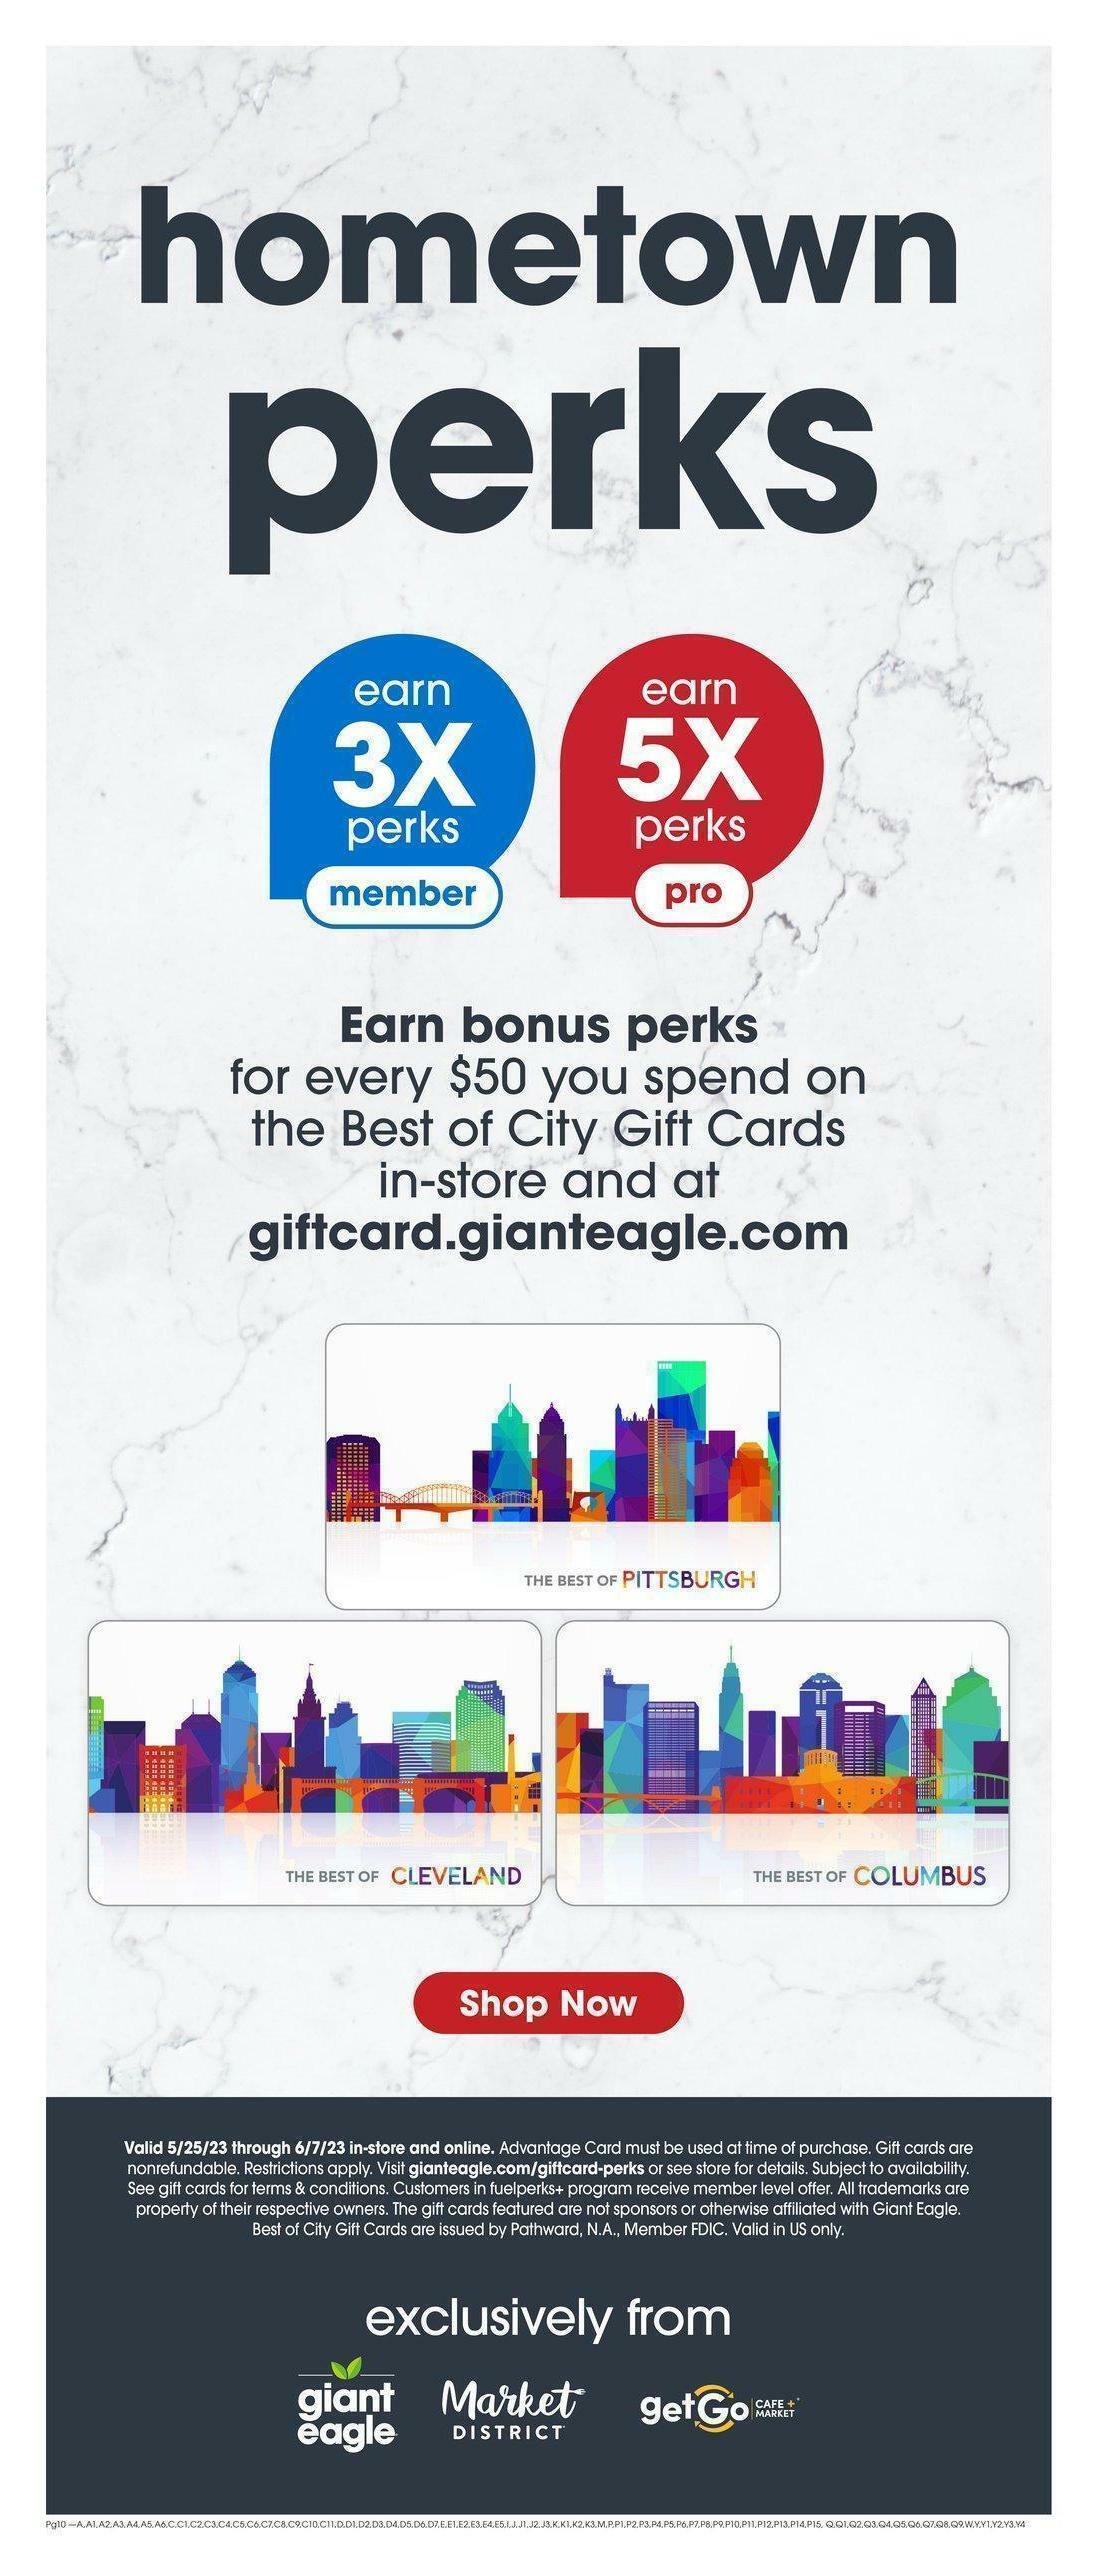 Giant Eagle Weekly Ad from June 1